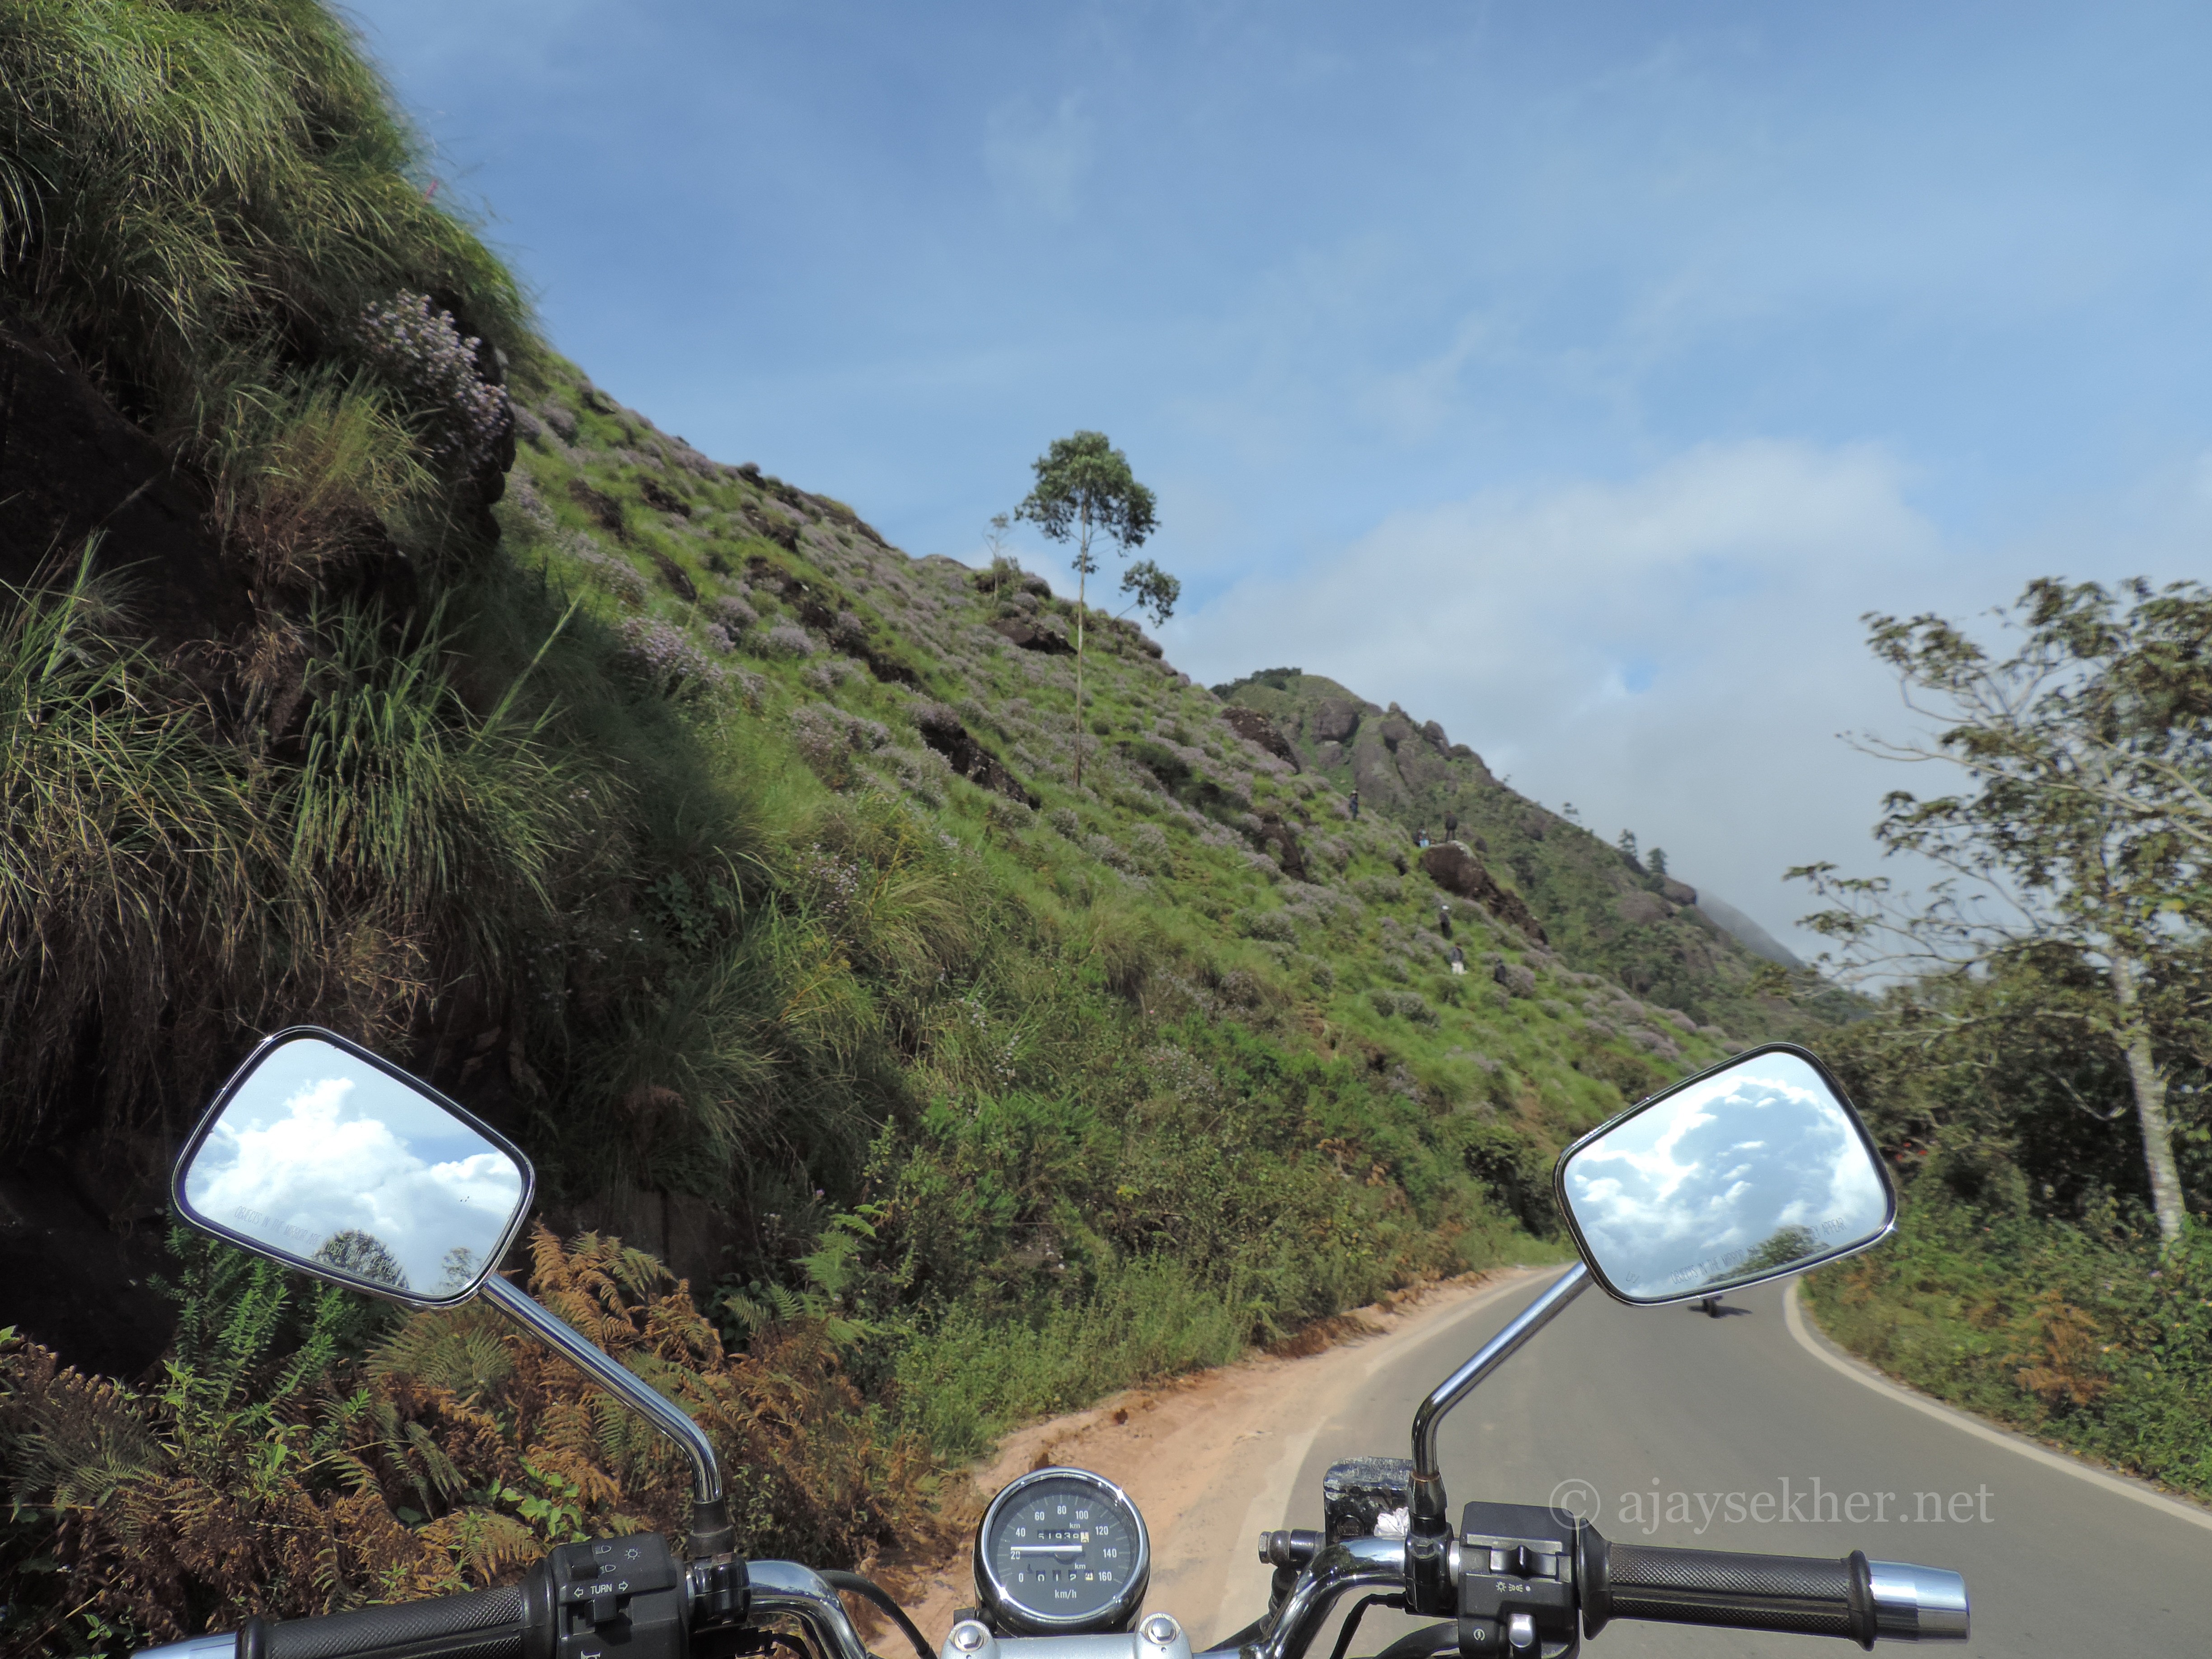 Riding to the Anamalais to see the Kurinji bloom by the Gap road on Munnar - Bodhi Medu road.